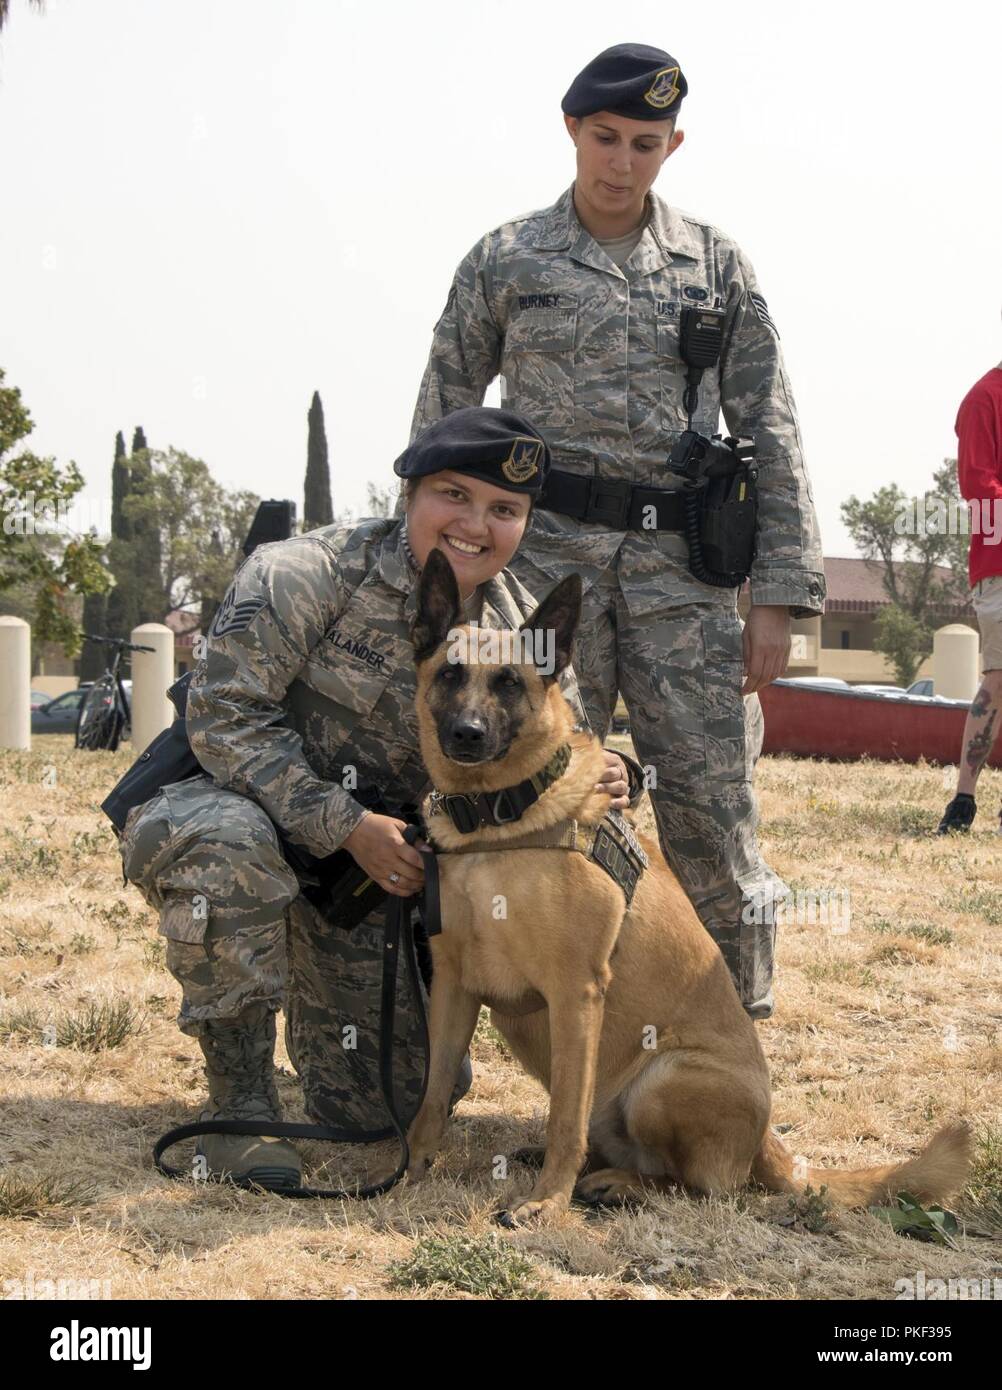 U.S. Air Force Staff Sgt. Miranda Kalander, SSgt Deveraux Burney and military working dog BBravo, all from the 60th Security Forces pause for a photo while attending the Rock the Block Festival at Travis Air Force Base, Calif., August 3, 2018. Patrons were treated to a variety of activities to include Mobility from the U.S. Band of the Golden West, carnival rides, games, kid’s fun zone, free food, and food trucks. Stock Photo